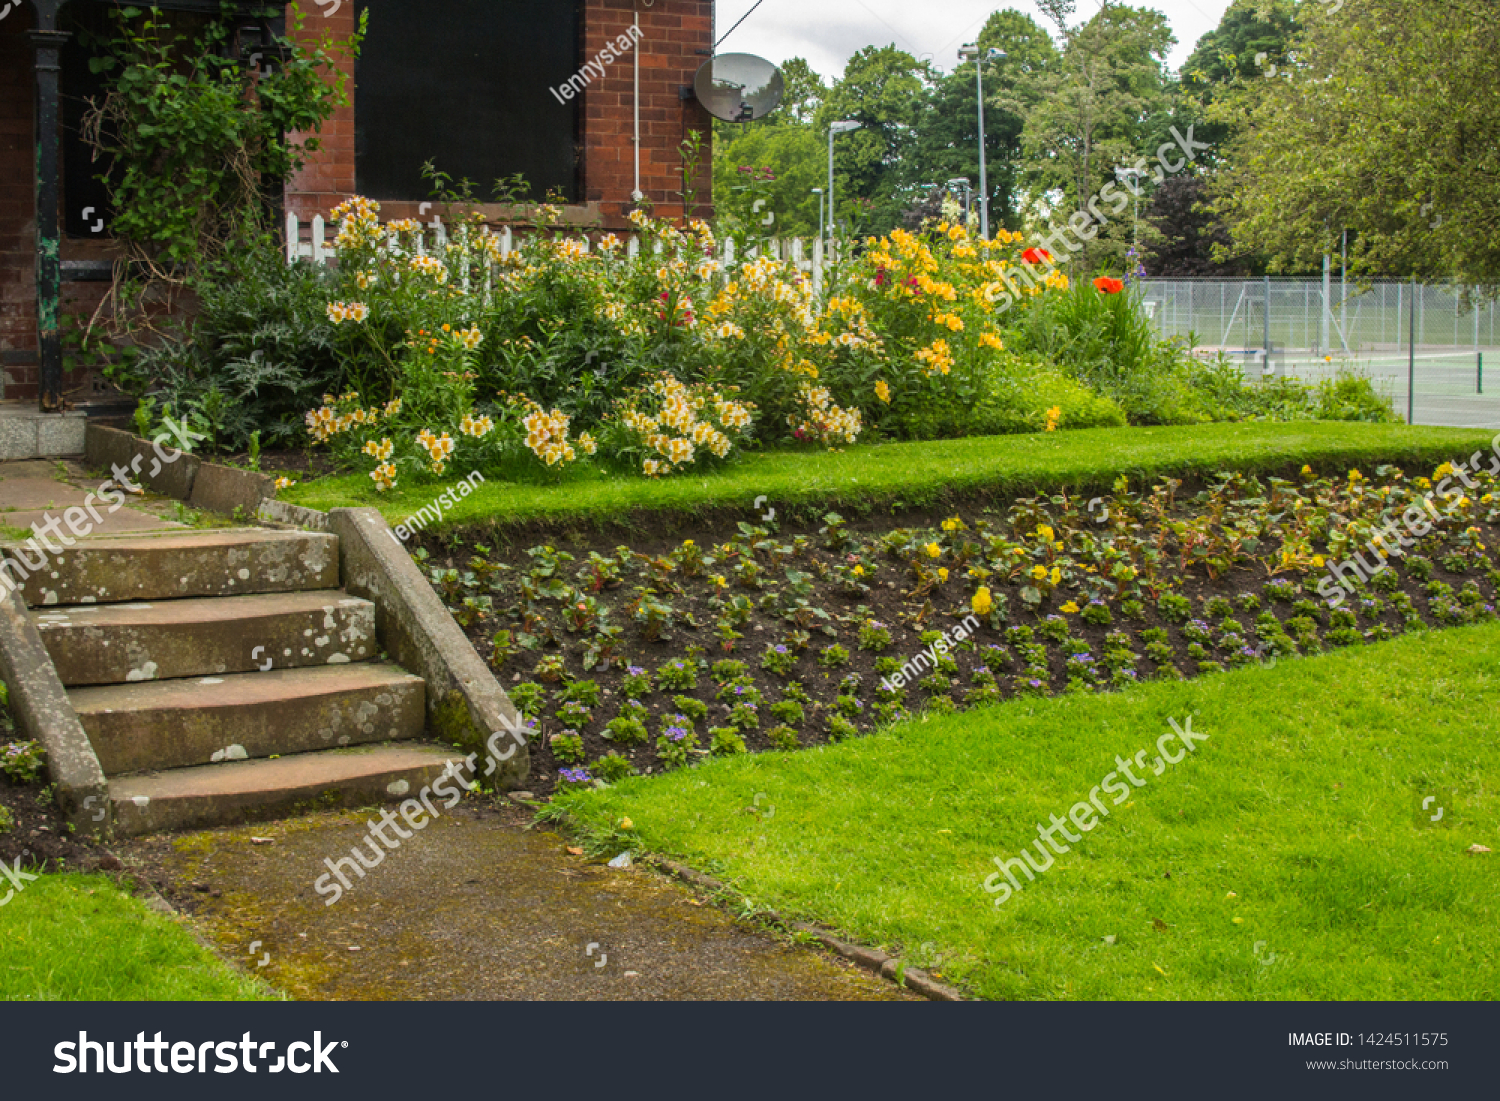 Landscape beds in front of house